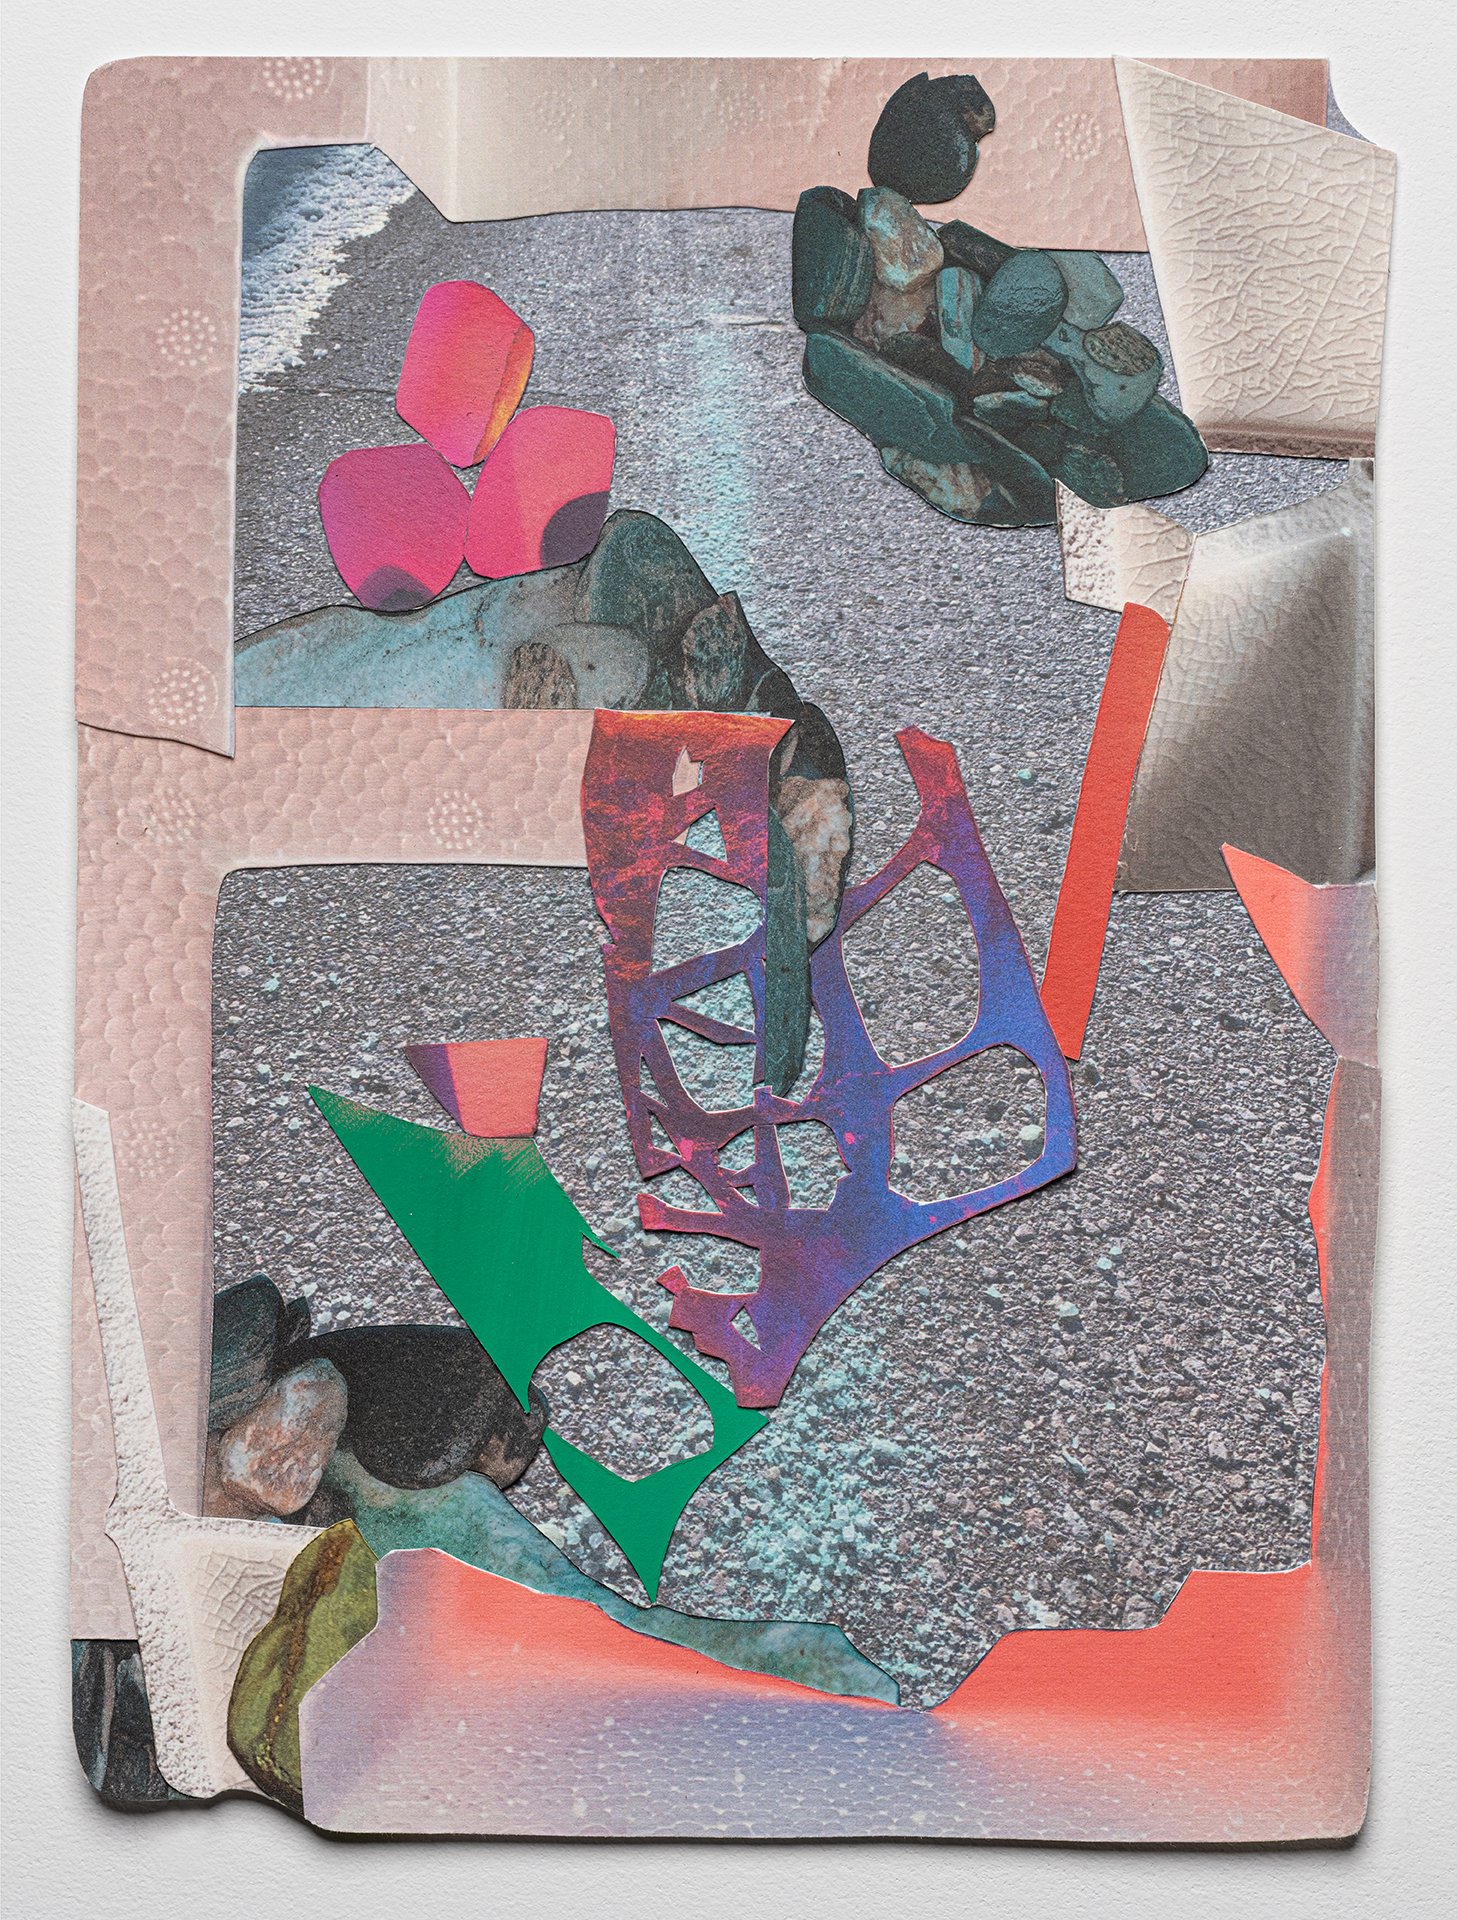   Amy Sacksteder ,  Memory Sieve 1 , 2022, cut and collaged inkjet prints, acrylic gouache on paper, 10 1/2 x 8” 